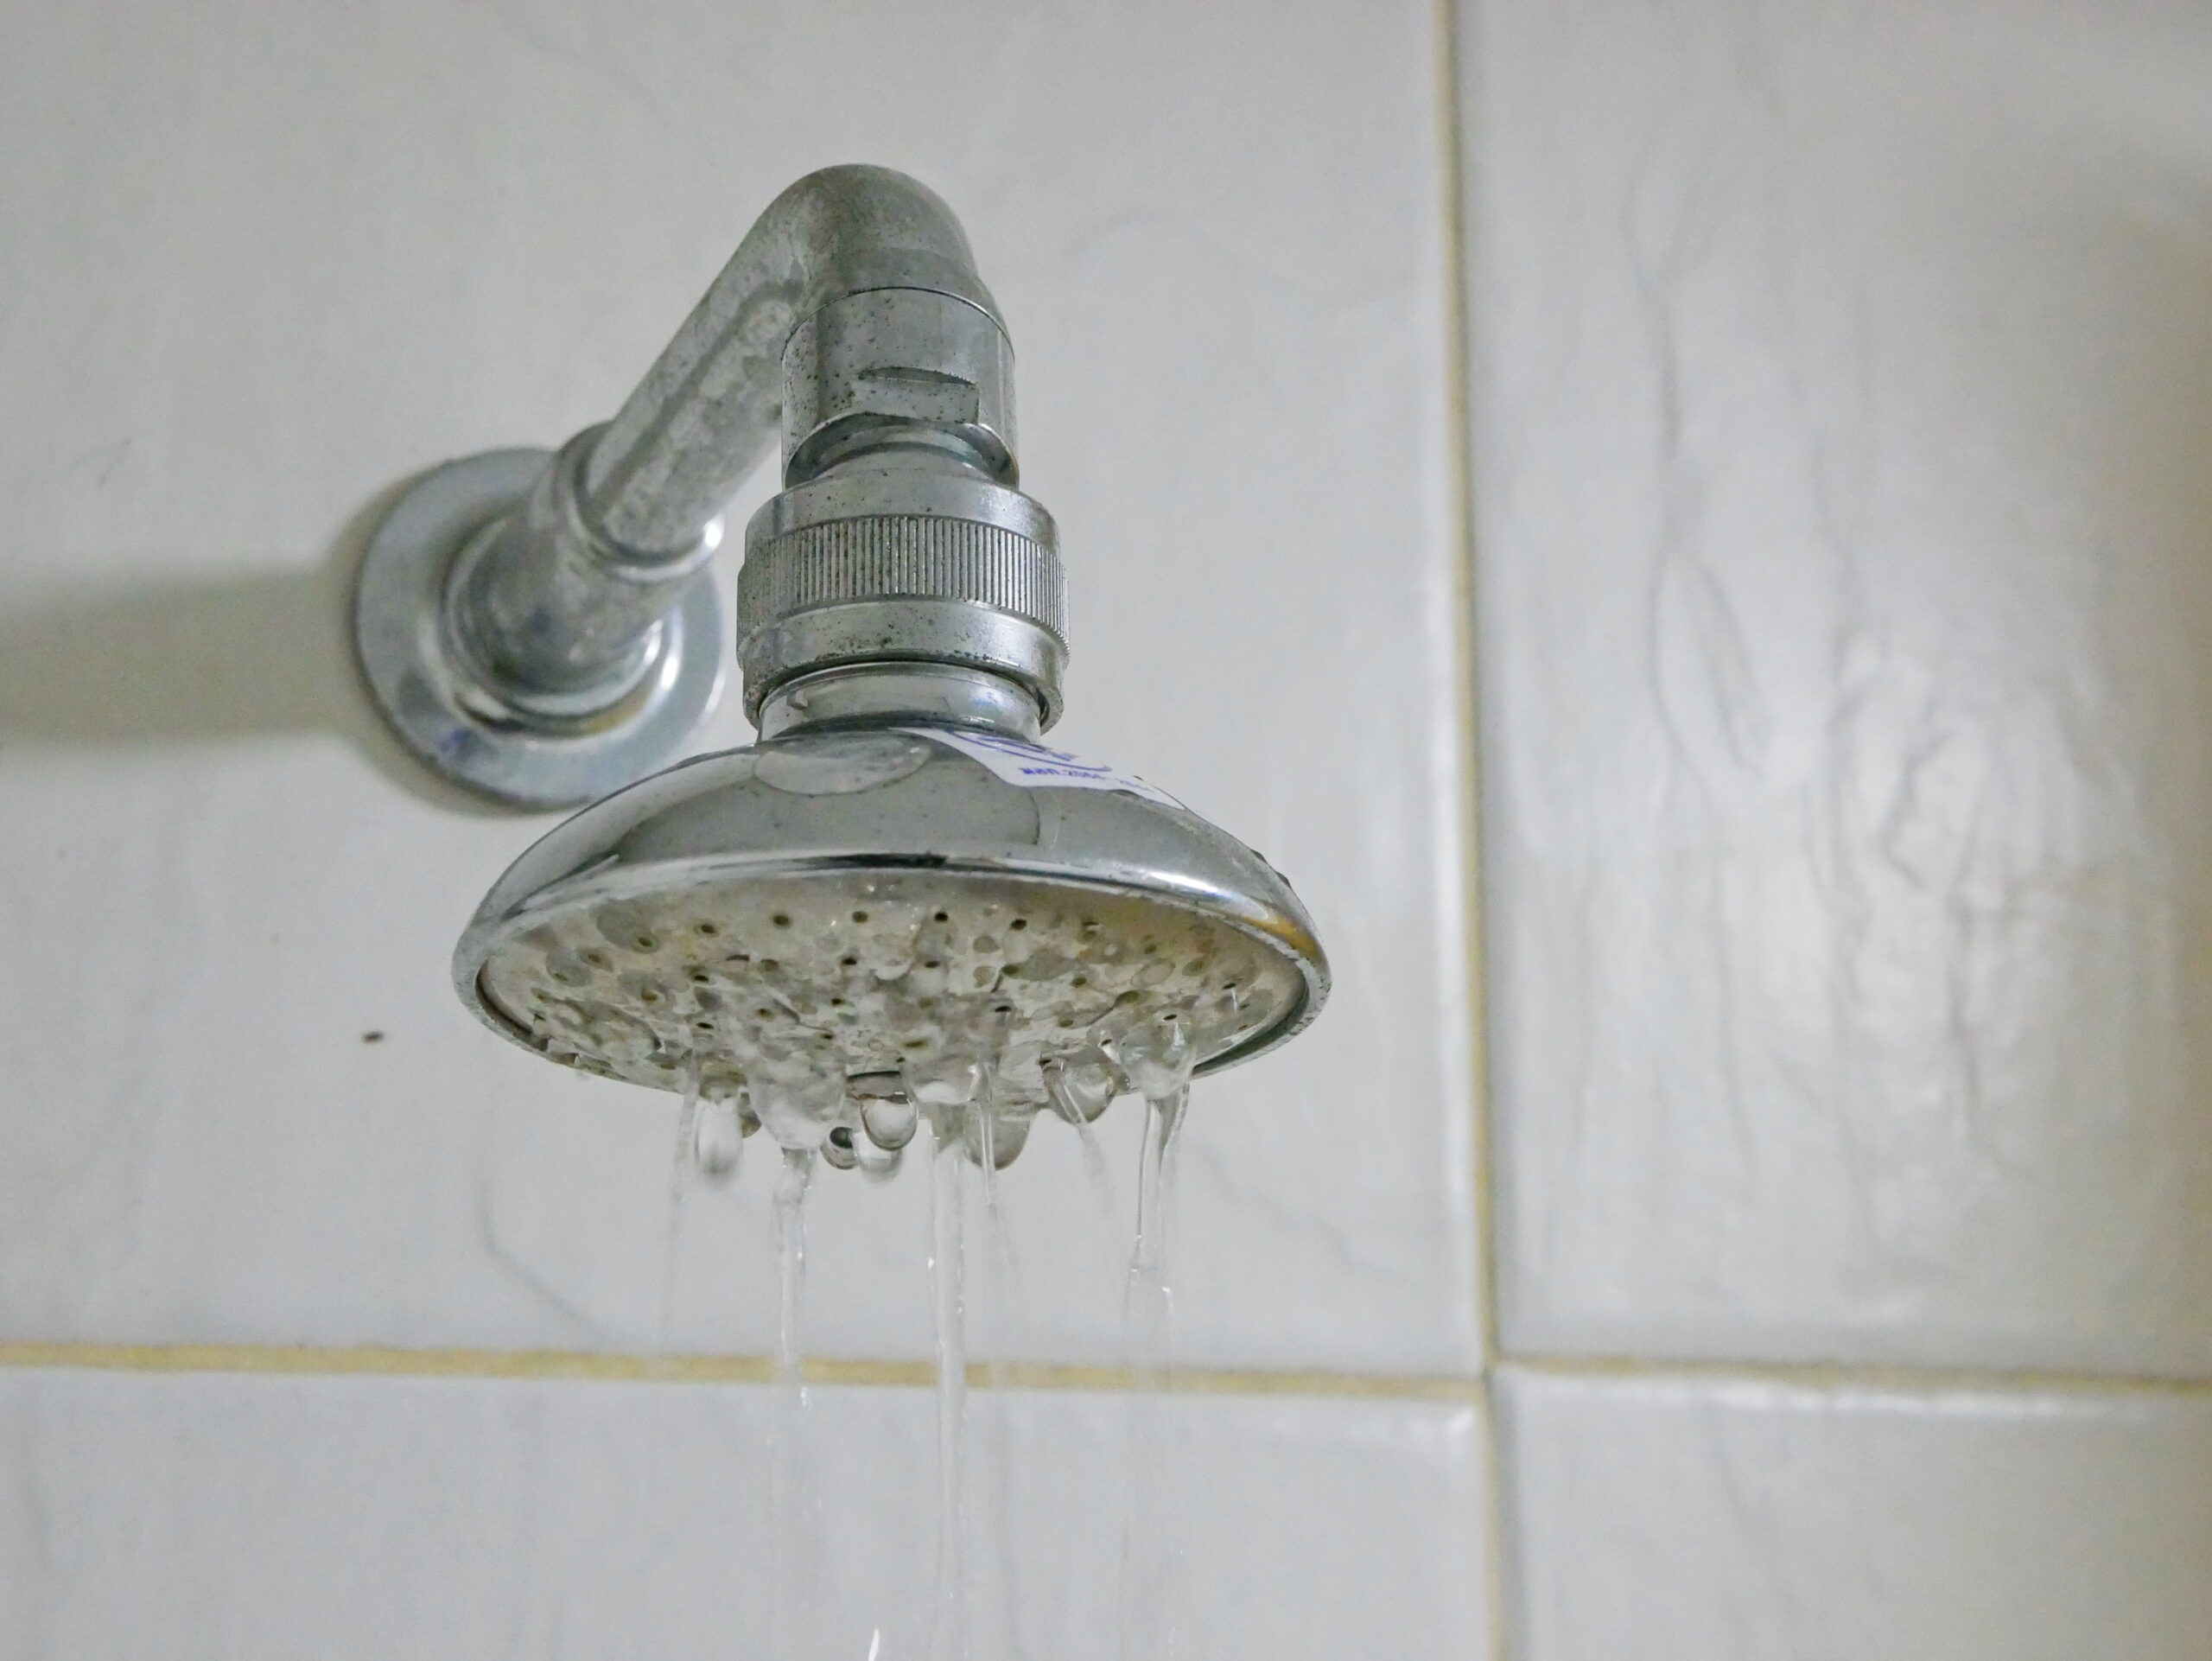 Close up of clogged shower head with very low water pressure